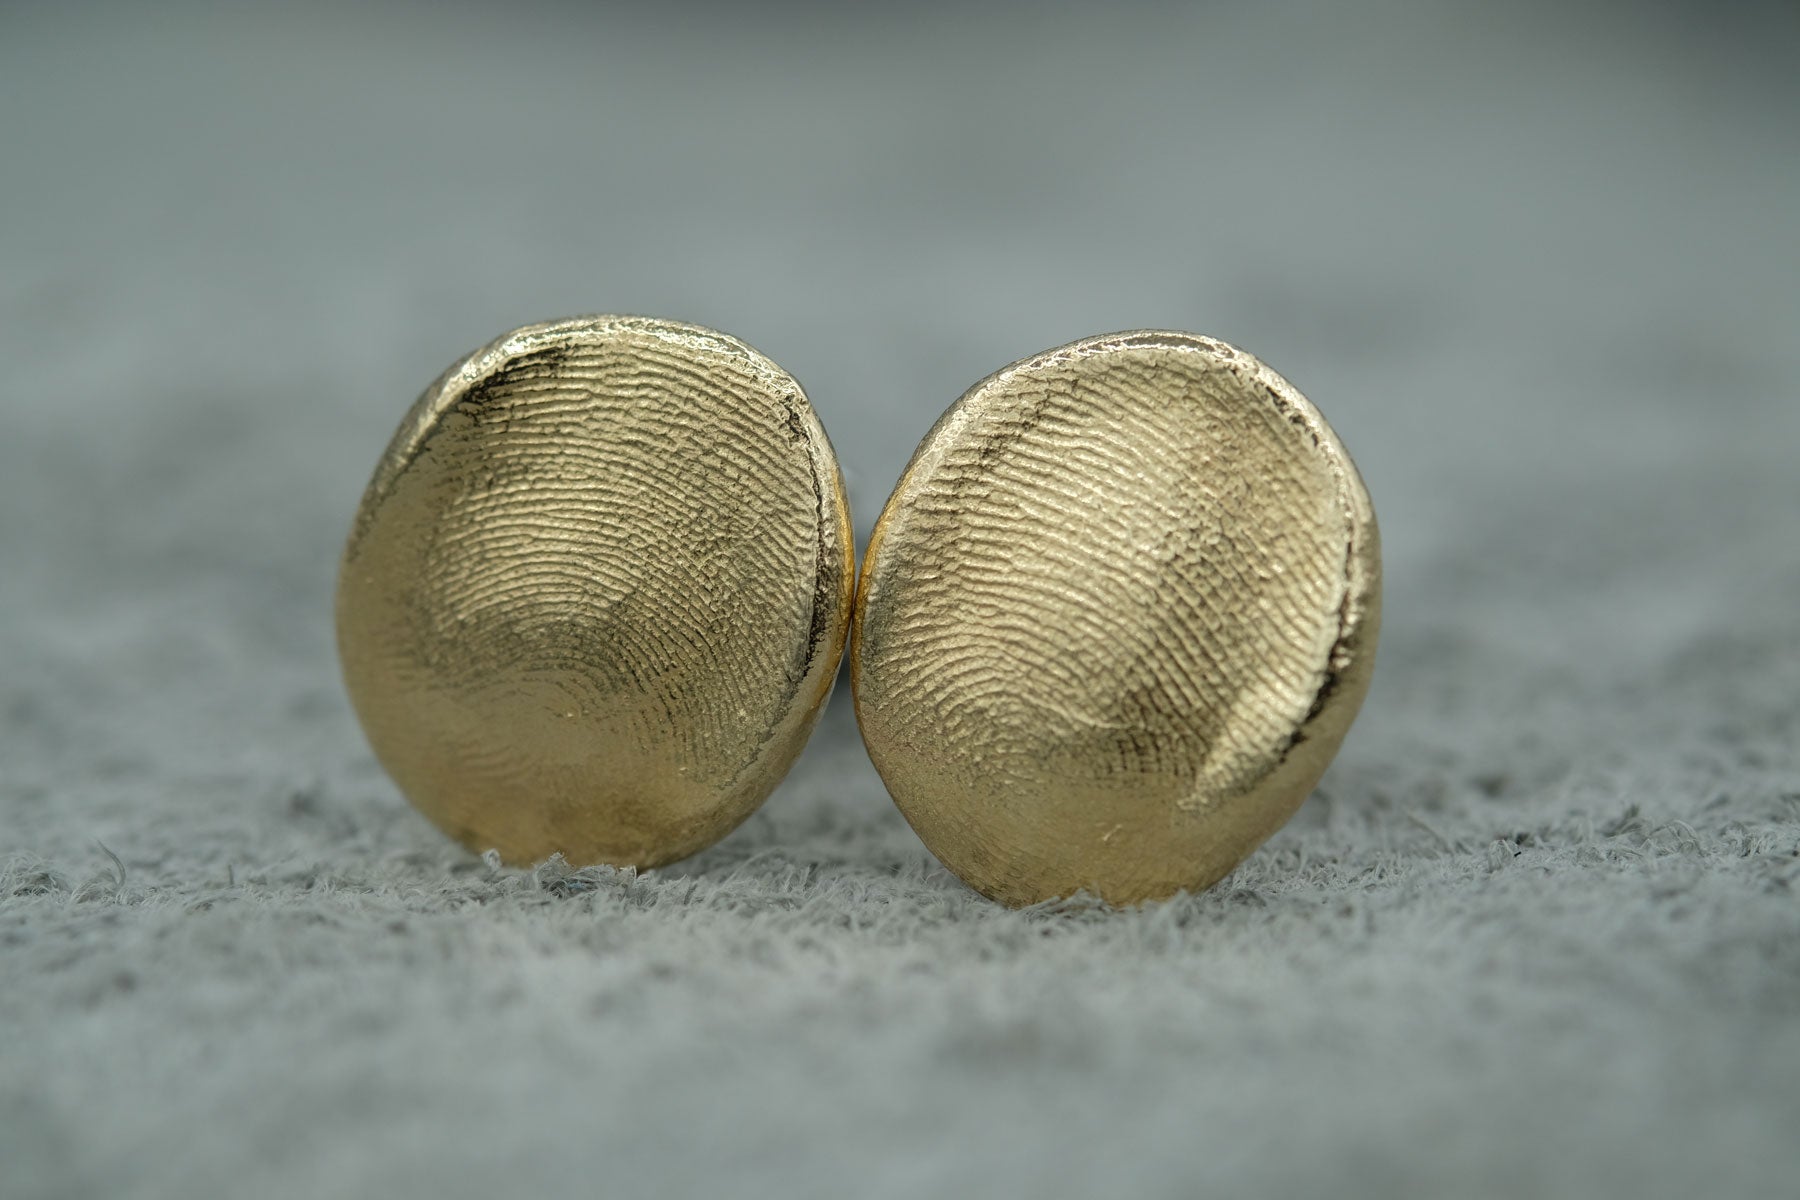 Children's Fingerprints Cufflinks in solid 10k Gold and 925 Sterling Silver by Matanai Jewelry